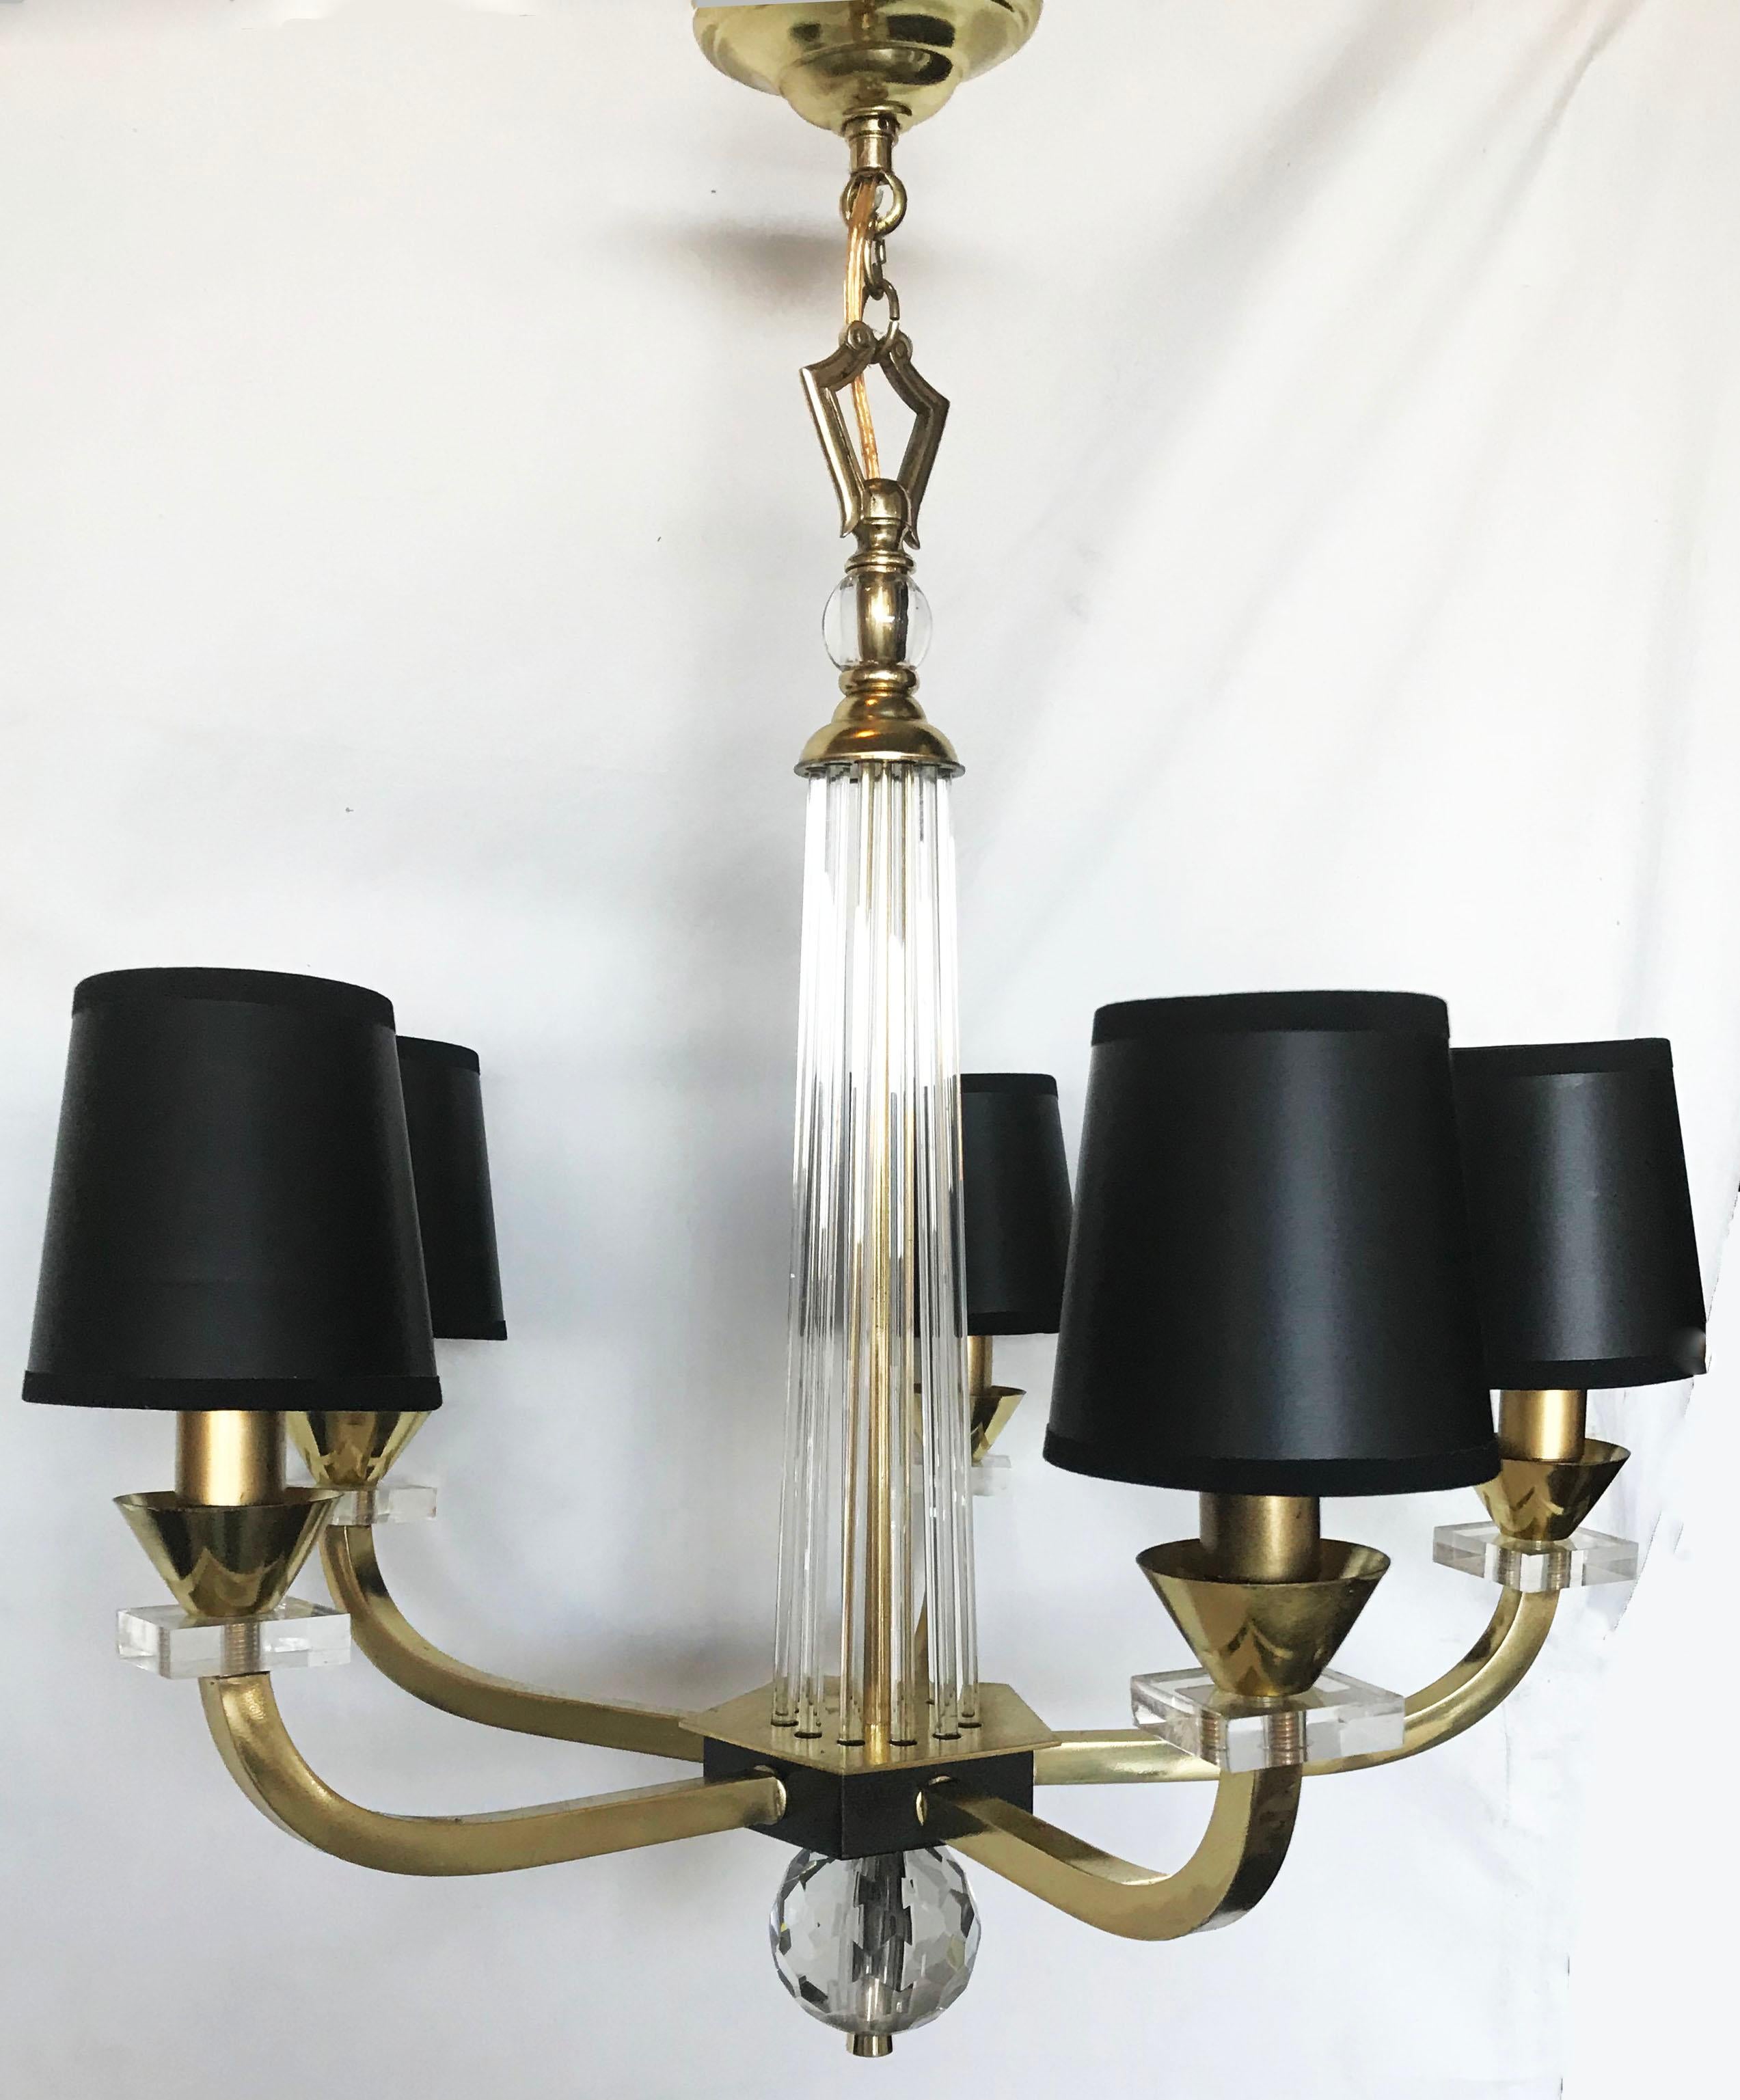 Superb J Adnet chandelier, brass and glass rods
Pair available, priced individually.
5 lights, 40 watts max bulb.
US rewired and in working condition.
 